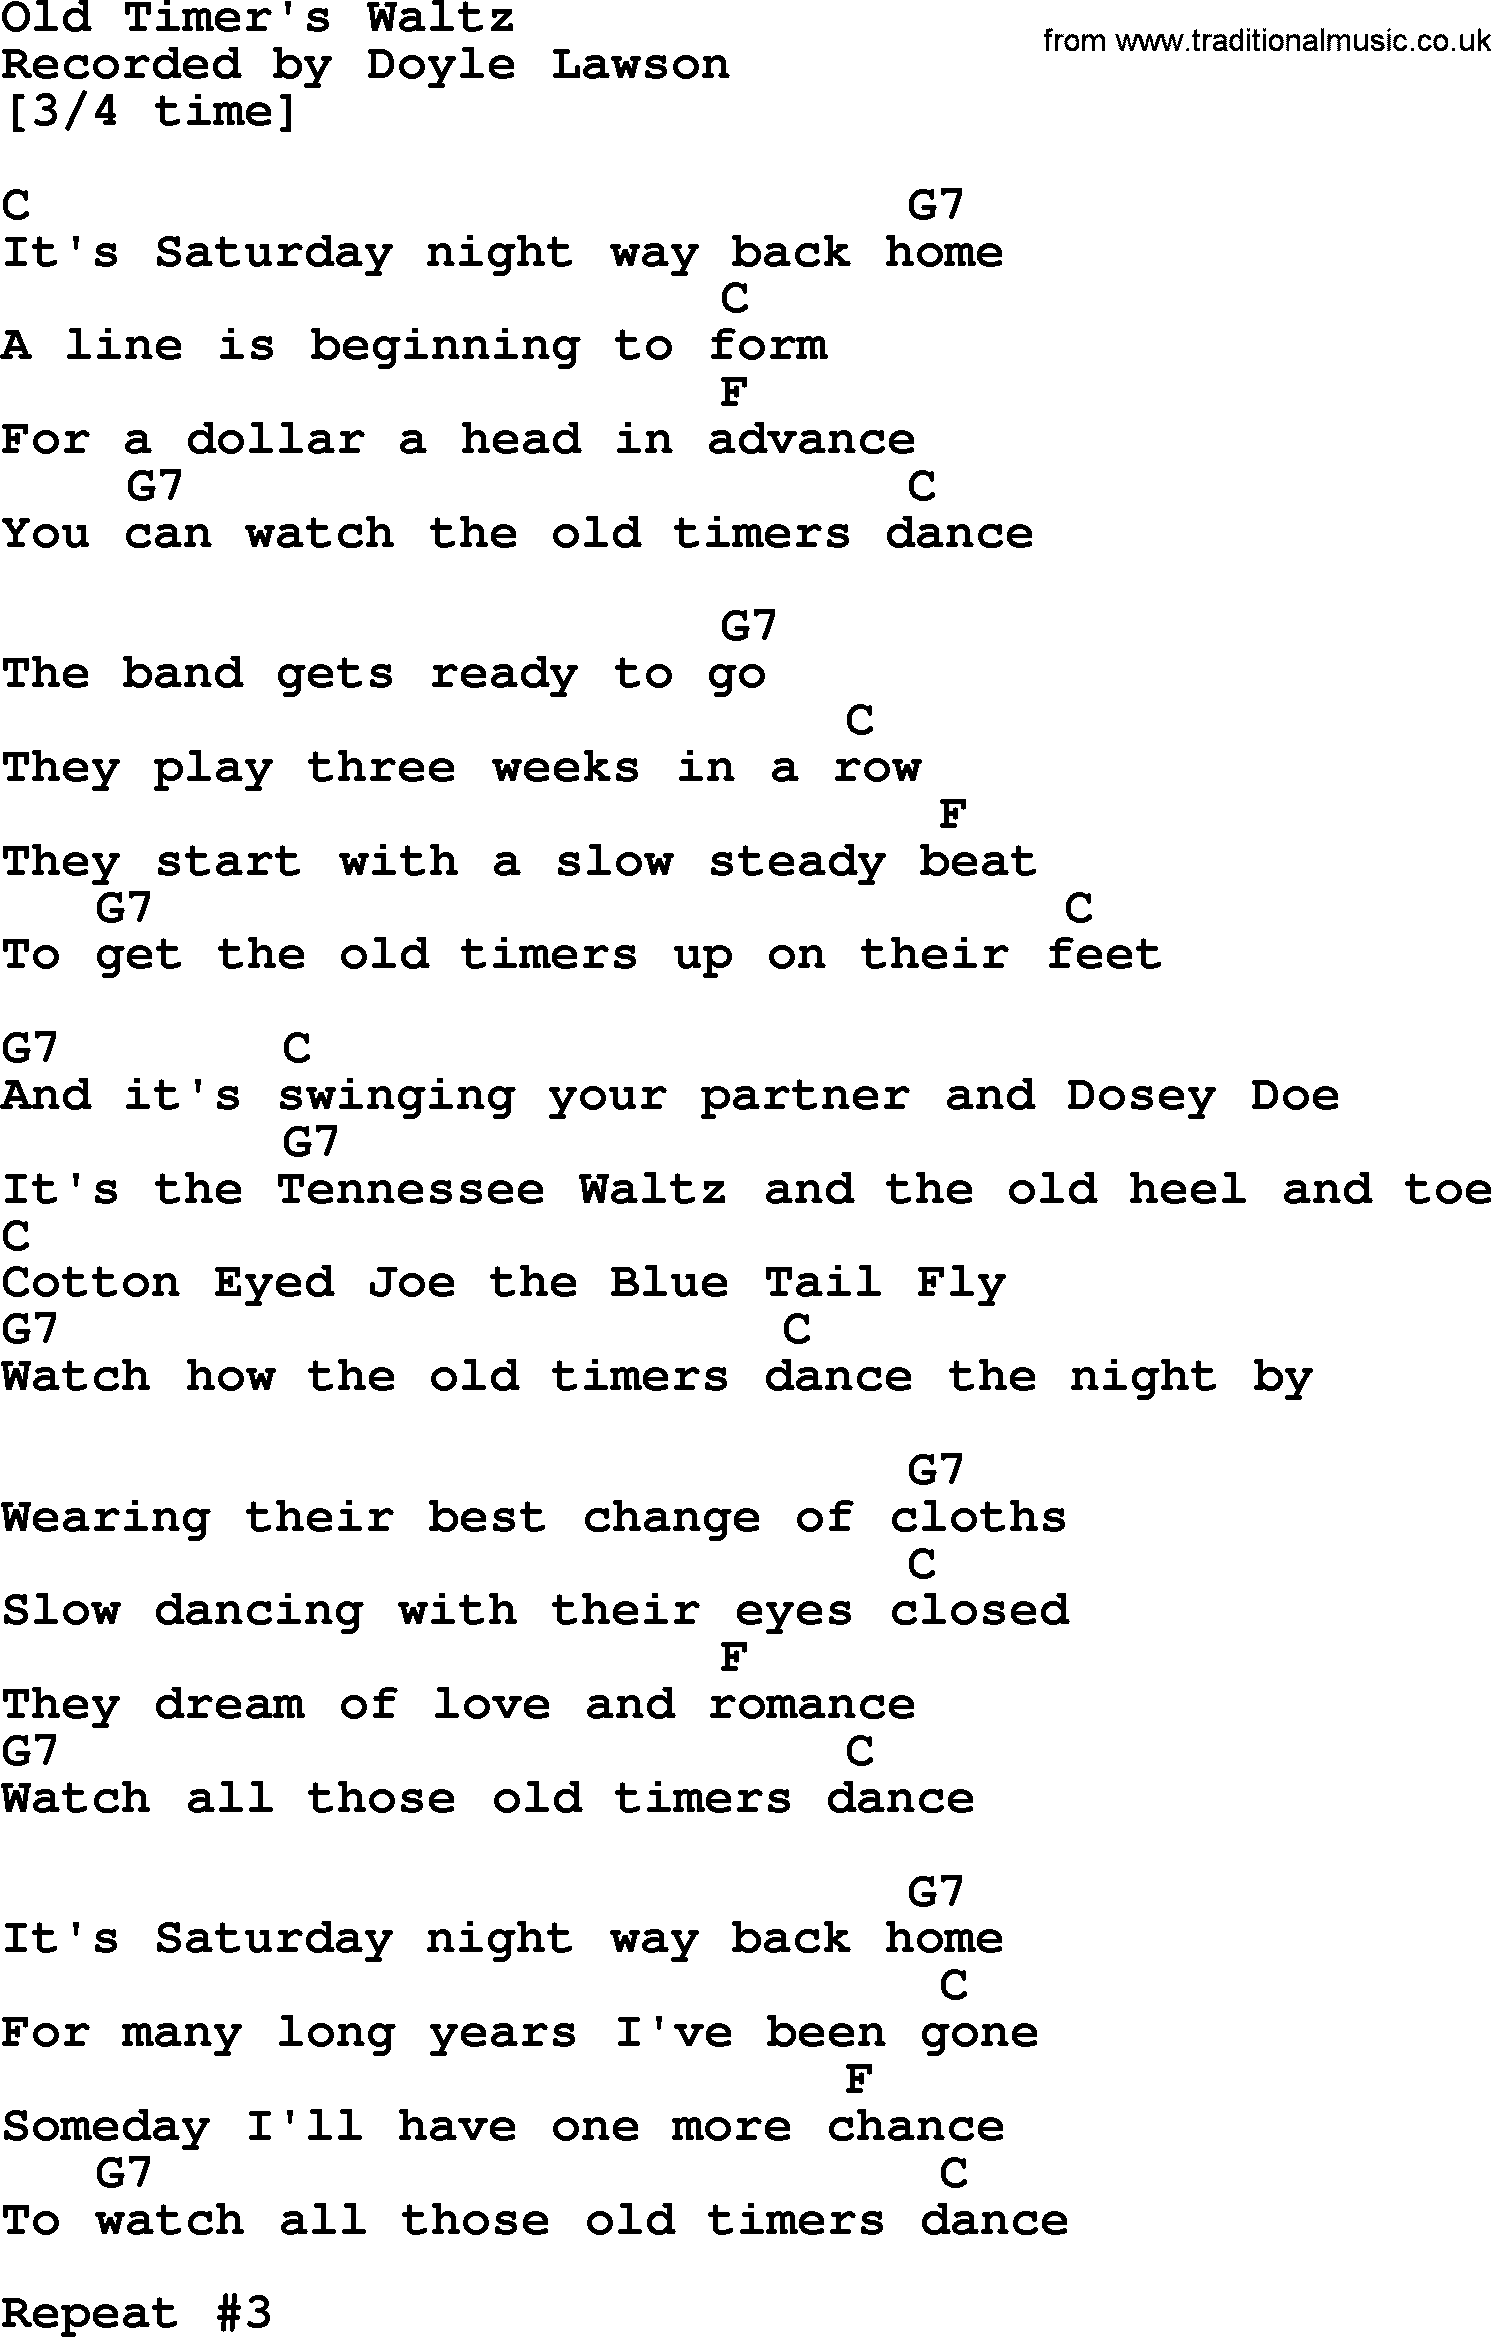 Bluegrass song: Old Timer's Waltz, lyrics and chords